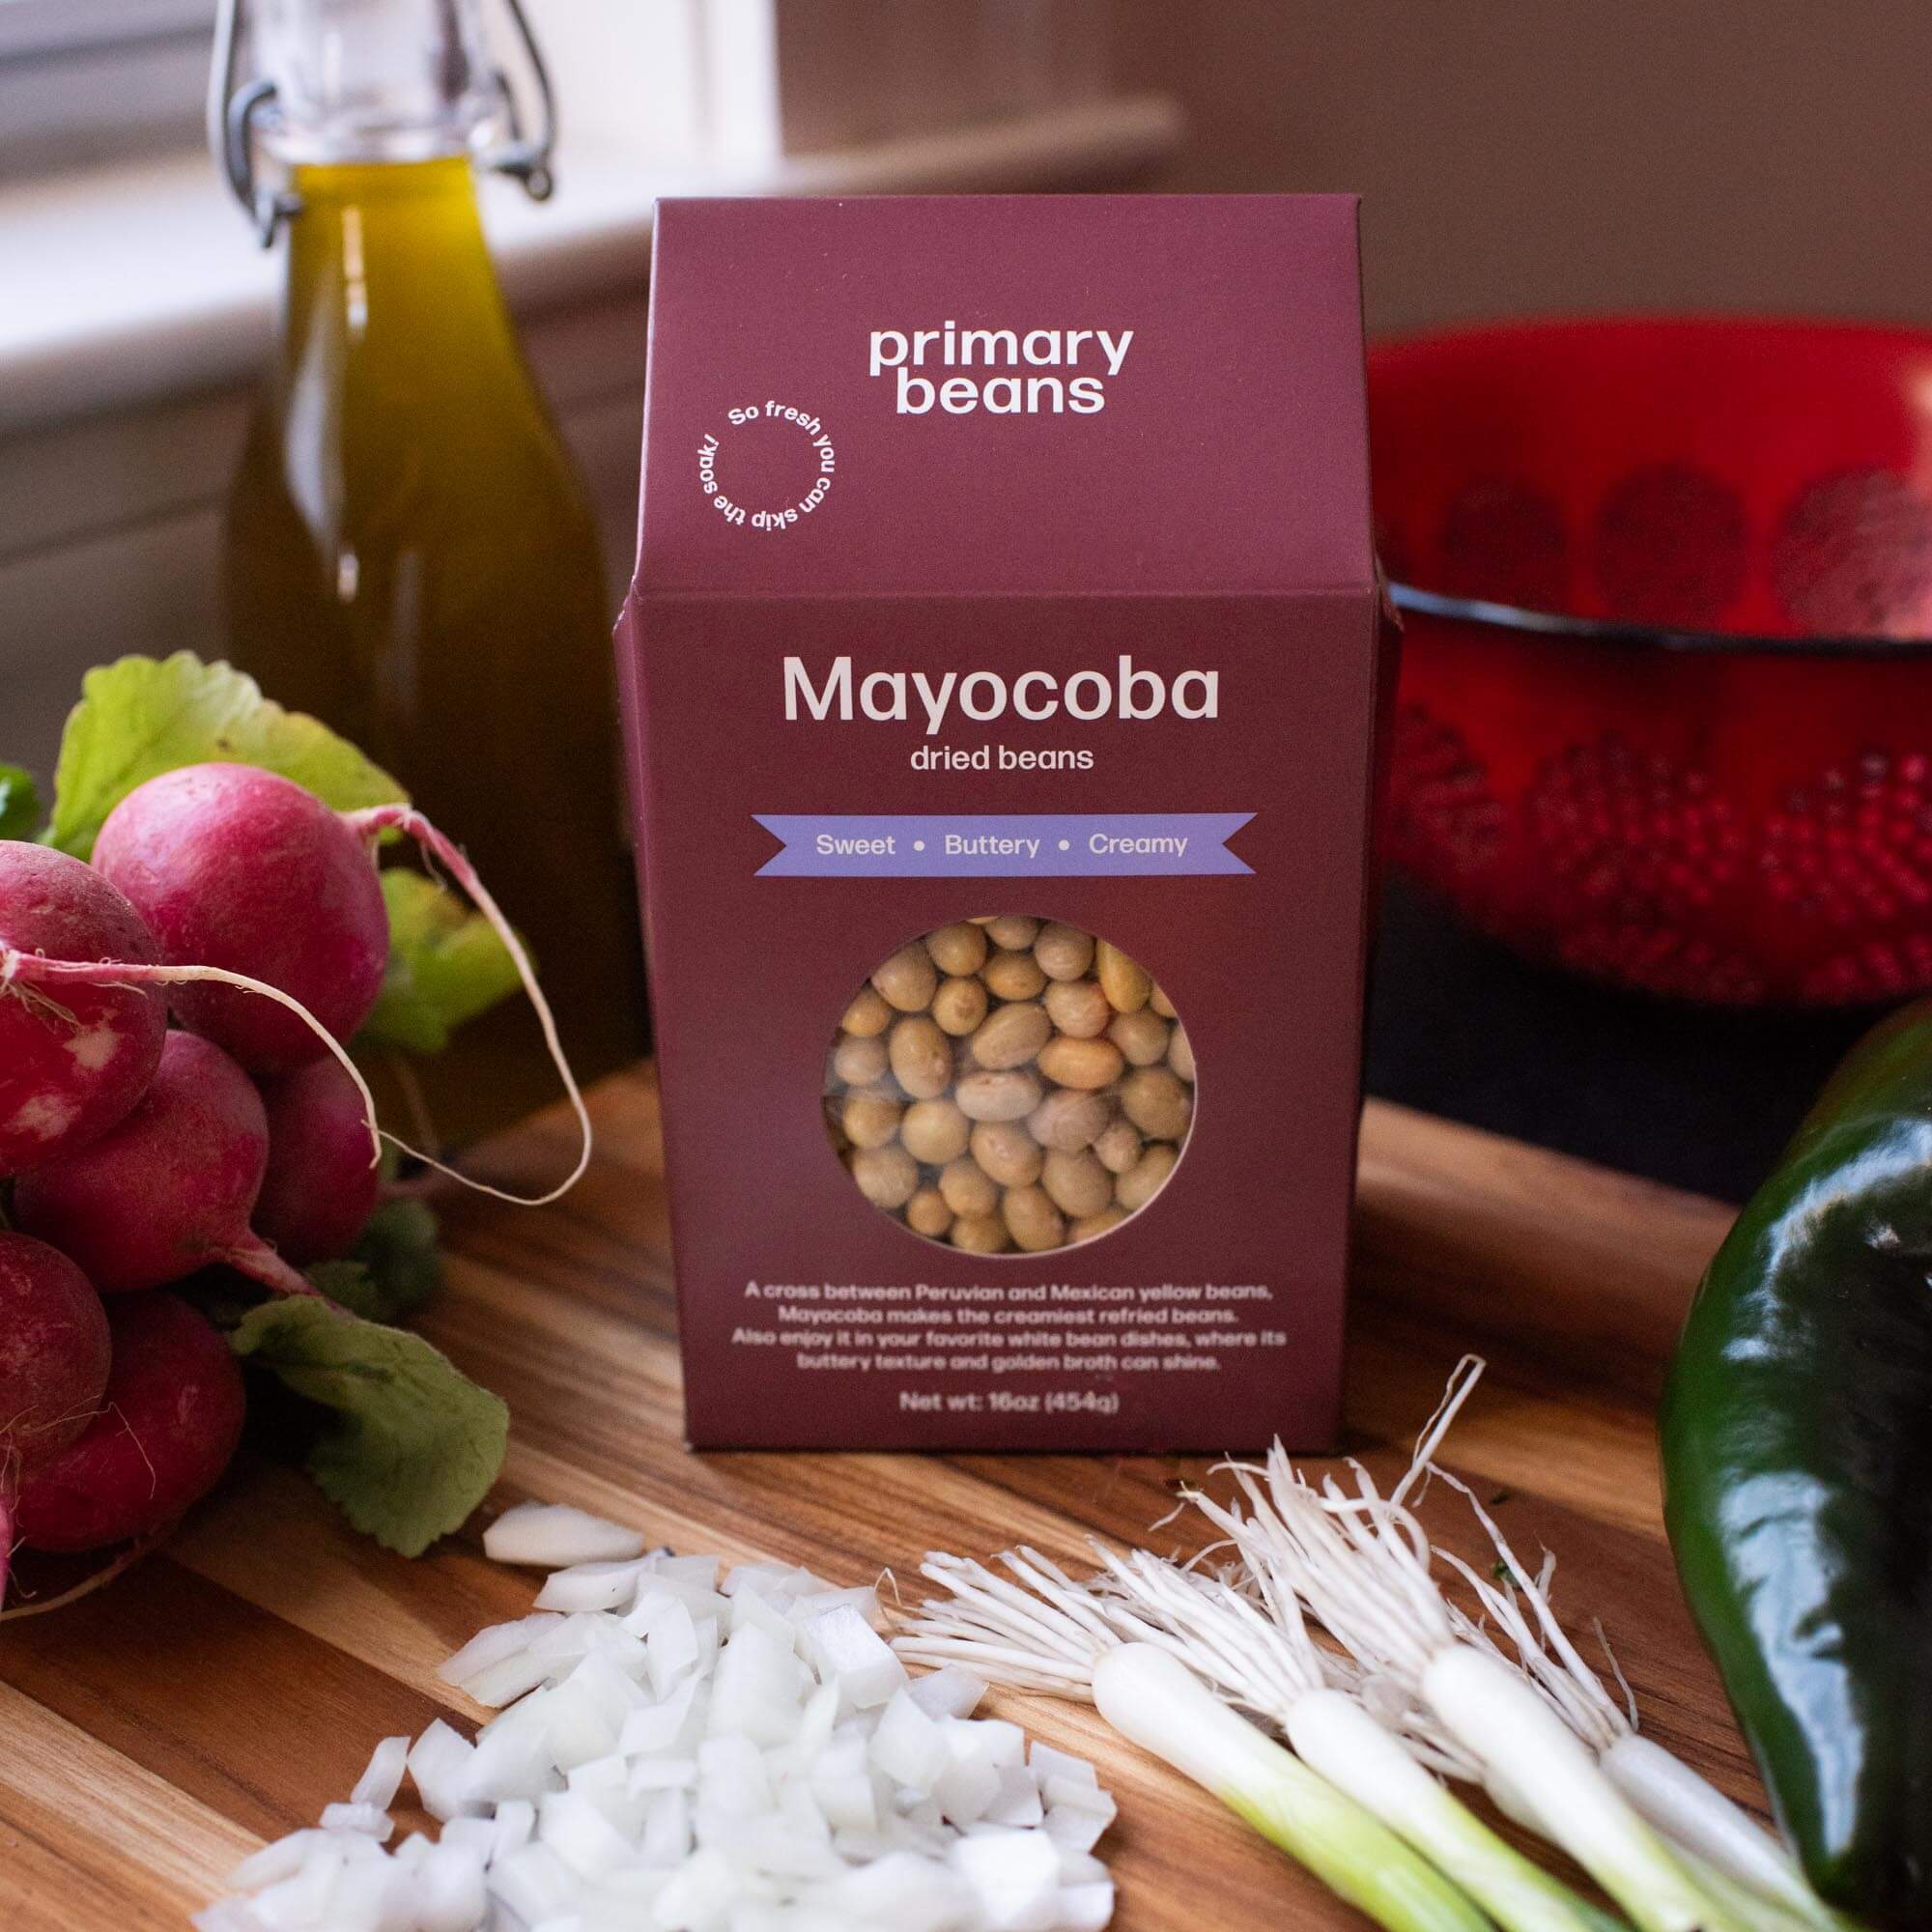 Primary Beans Mayocoba beans counter